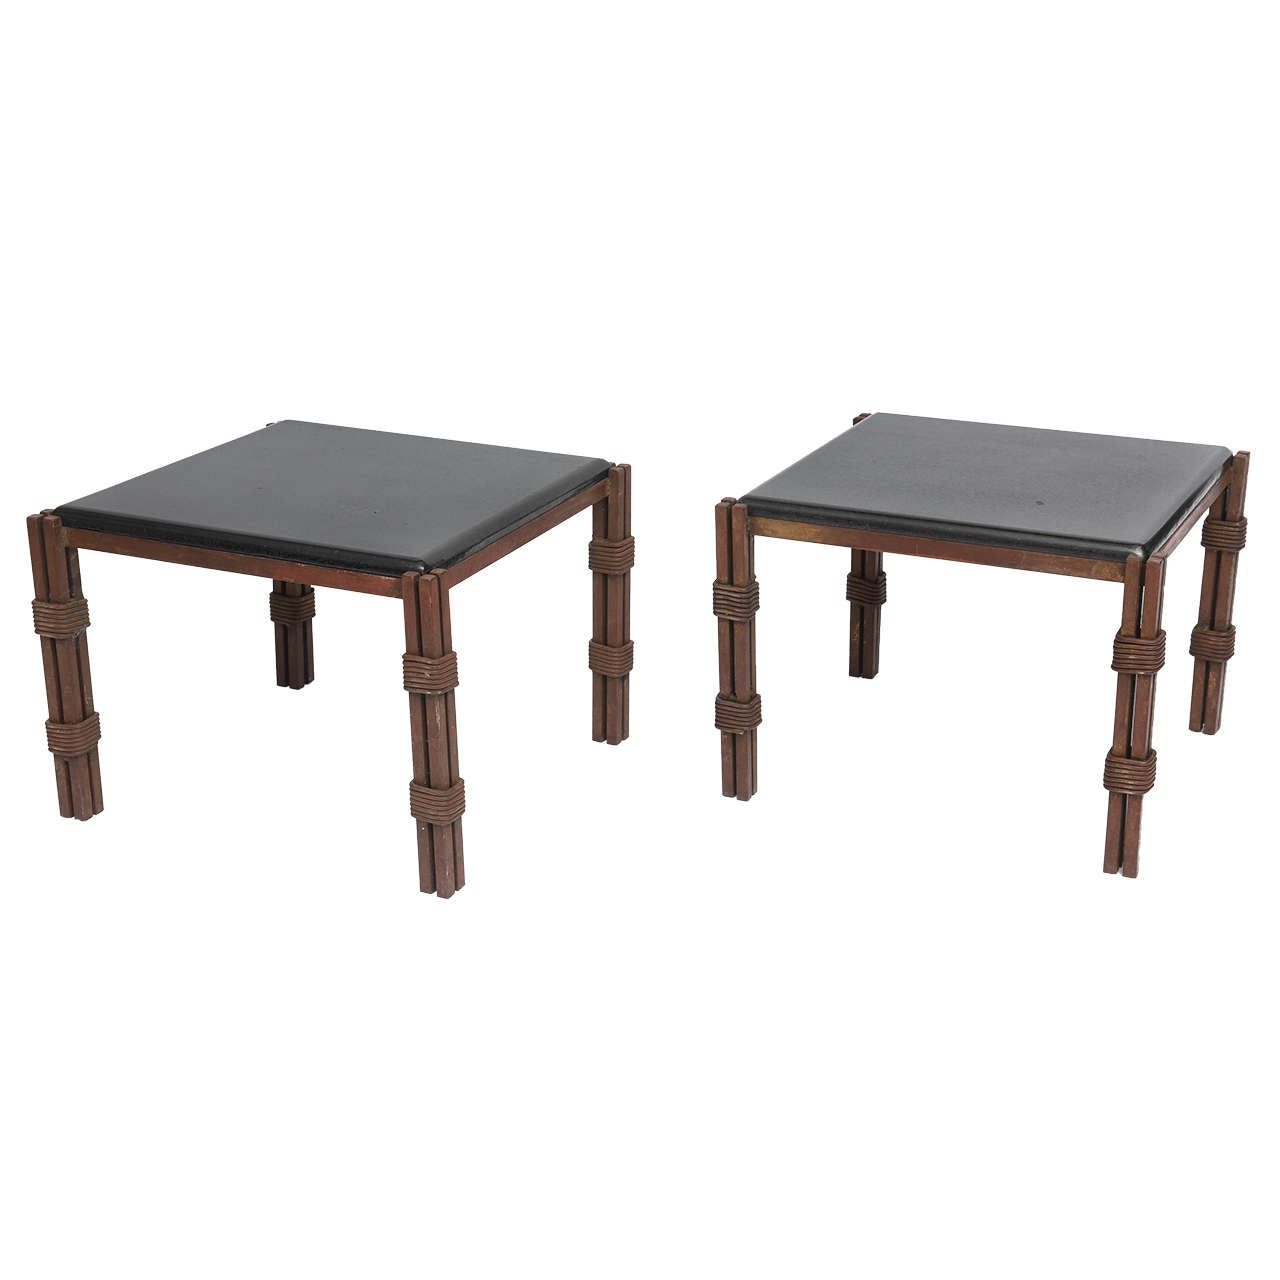 Pair of Mexican Modern Gilt and Painted Iron Marble-Top Tables by Arturo Pani For Sale